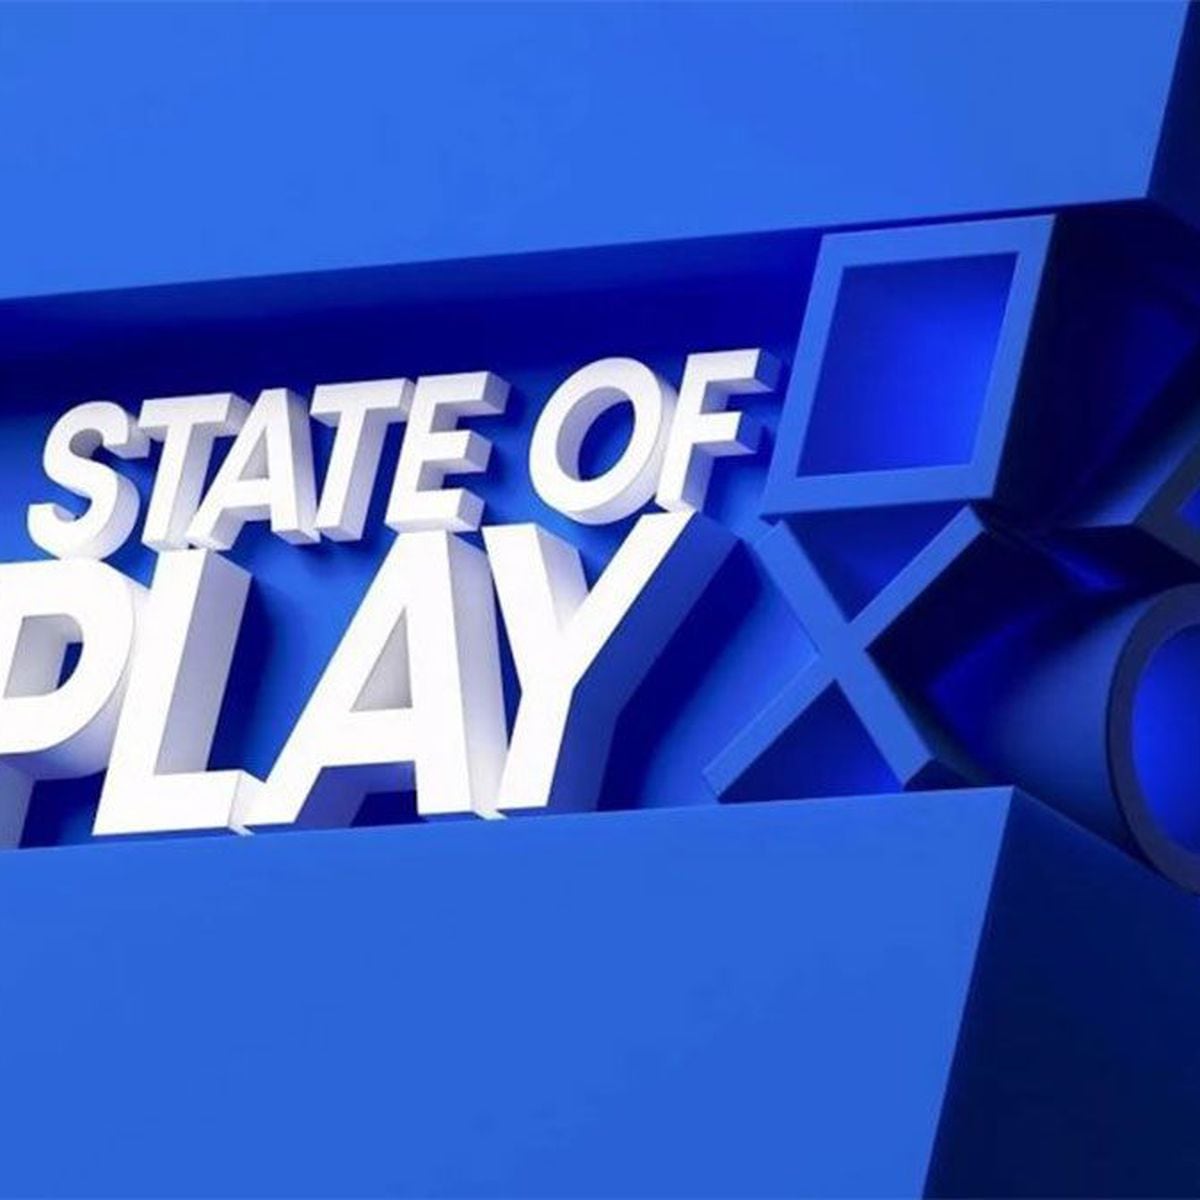 Everything Announced At The September PlayStation State Of Play